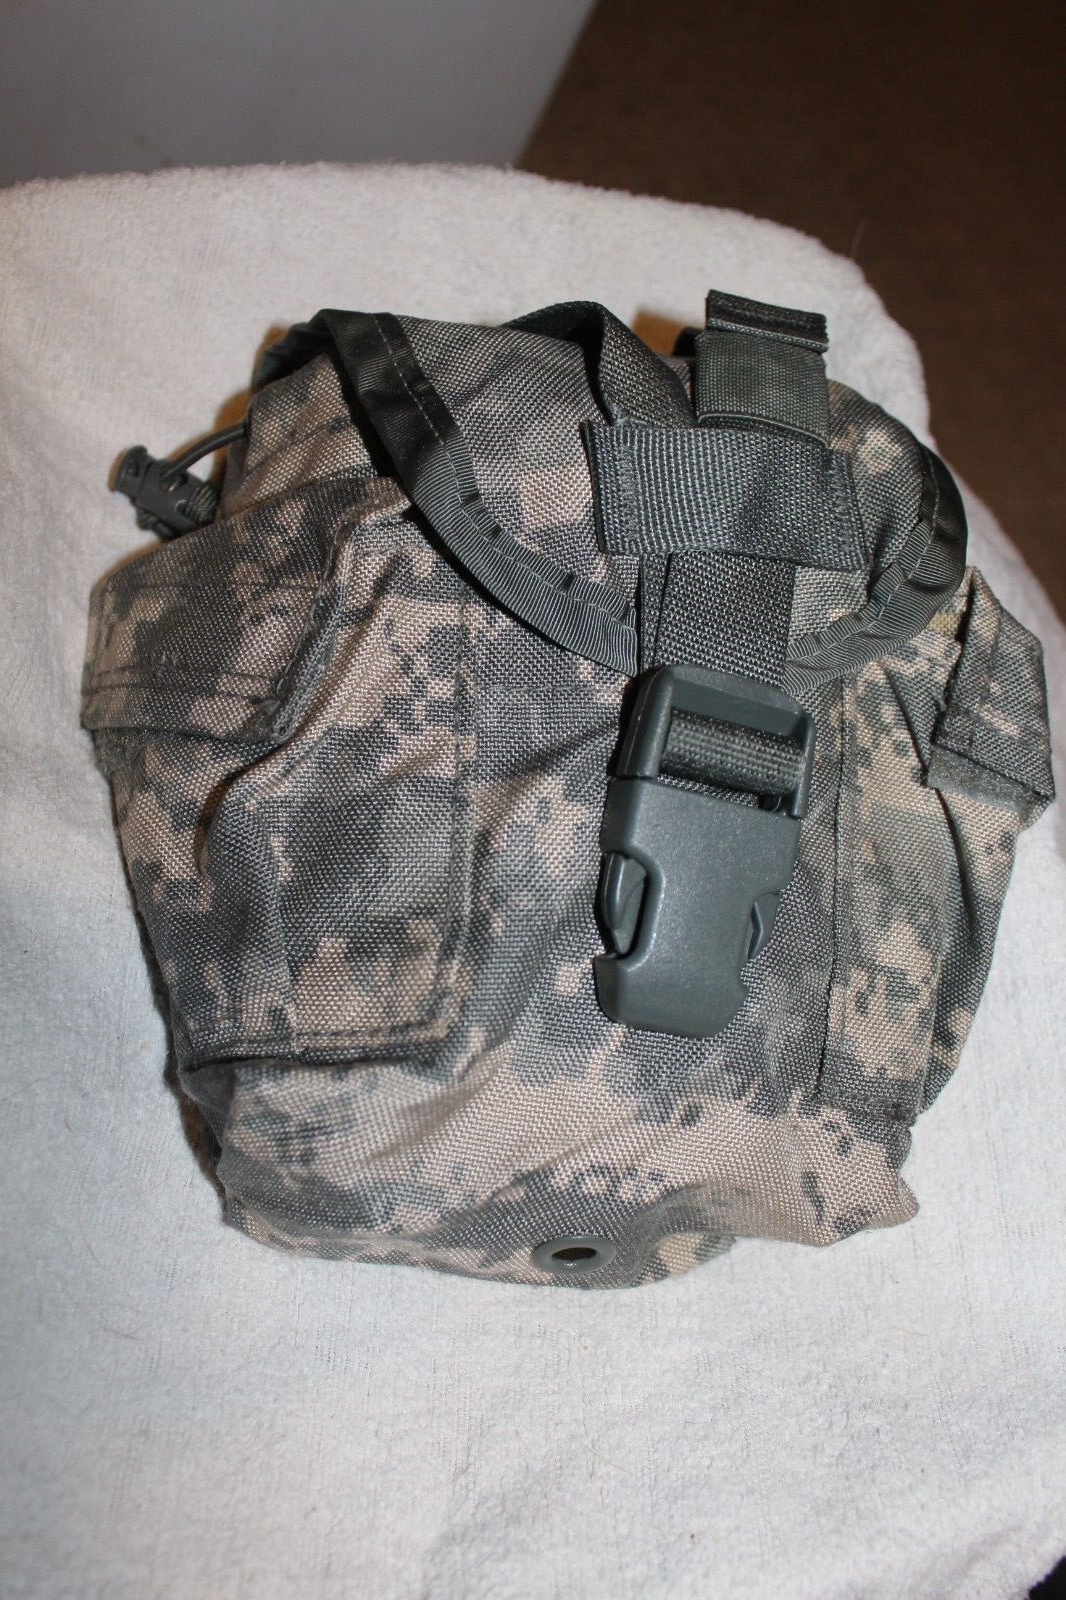 LOT OF TWO, US GI, ACU, MOLLE II, 1 QT Canteen Covers / General Purpose Pouches